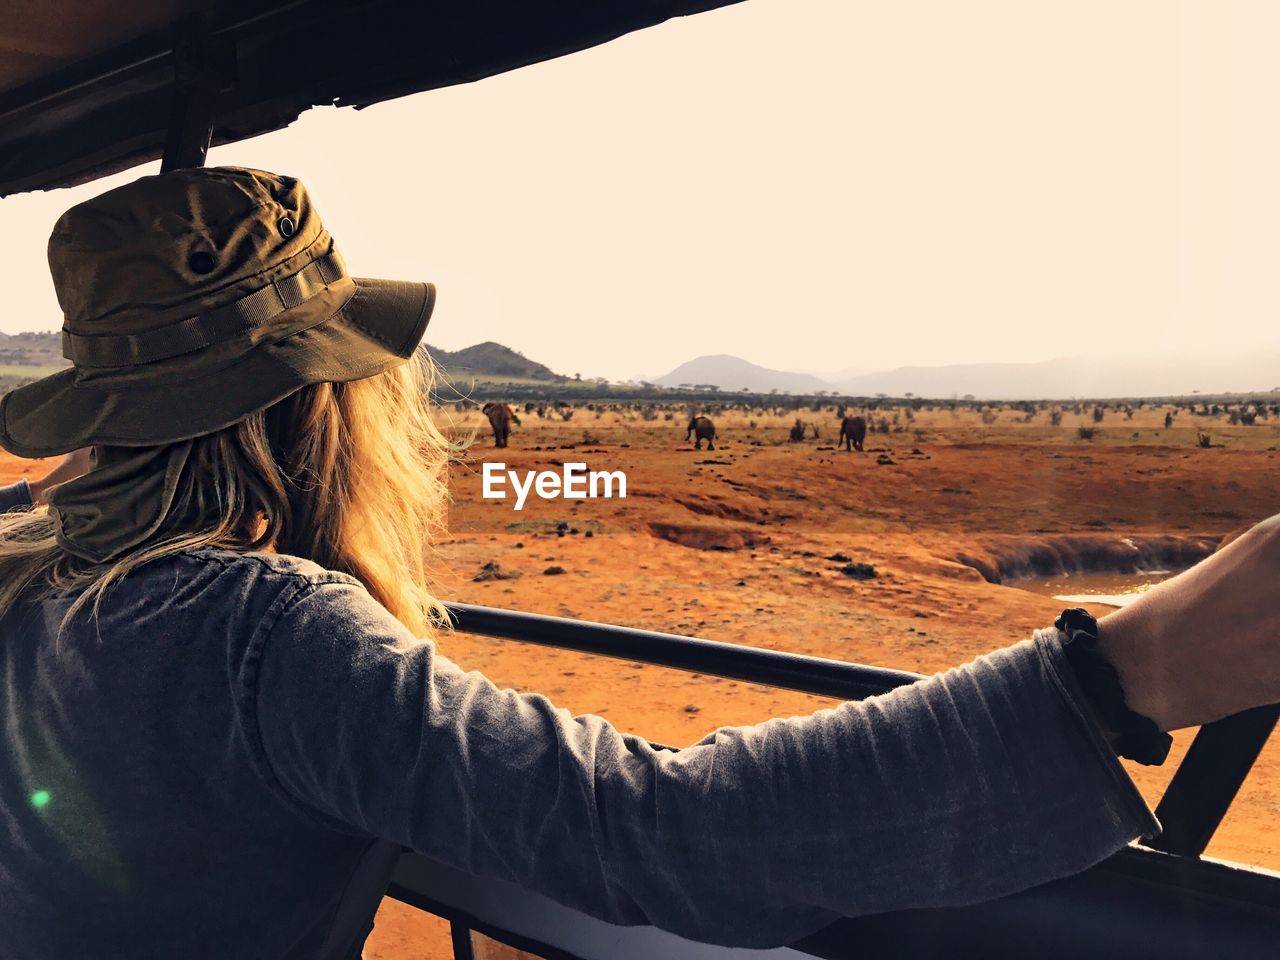 Rear view of woman in off-road vehicle looking at elephants at national park